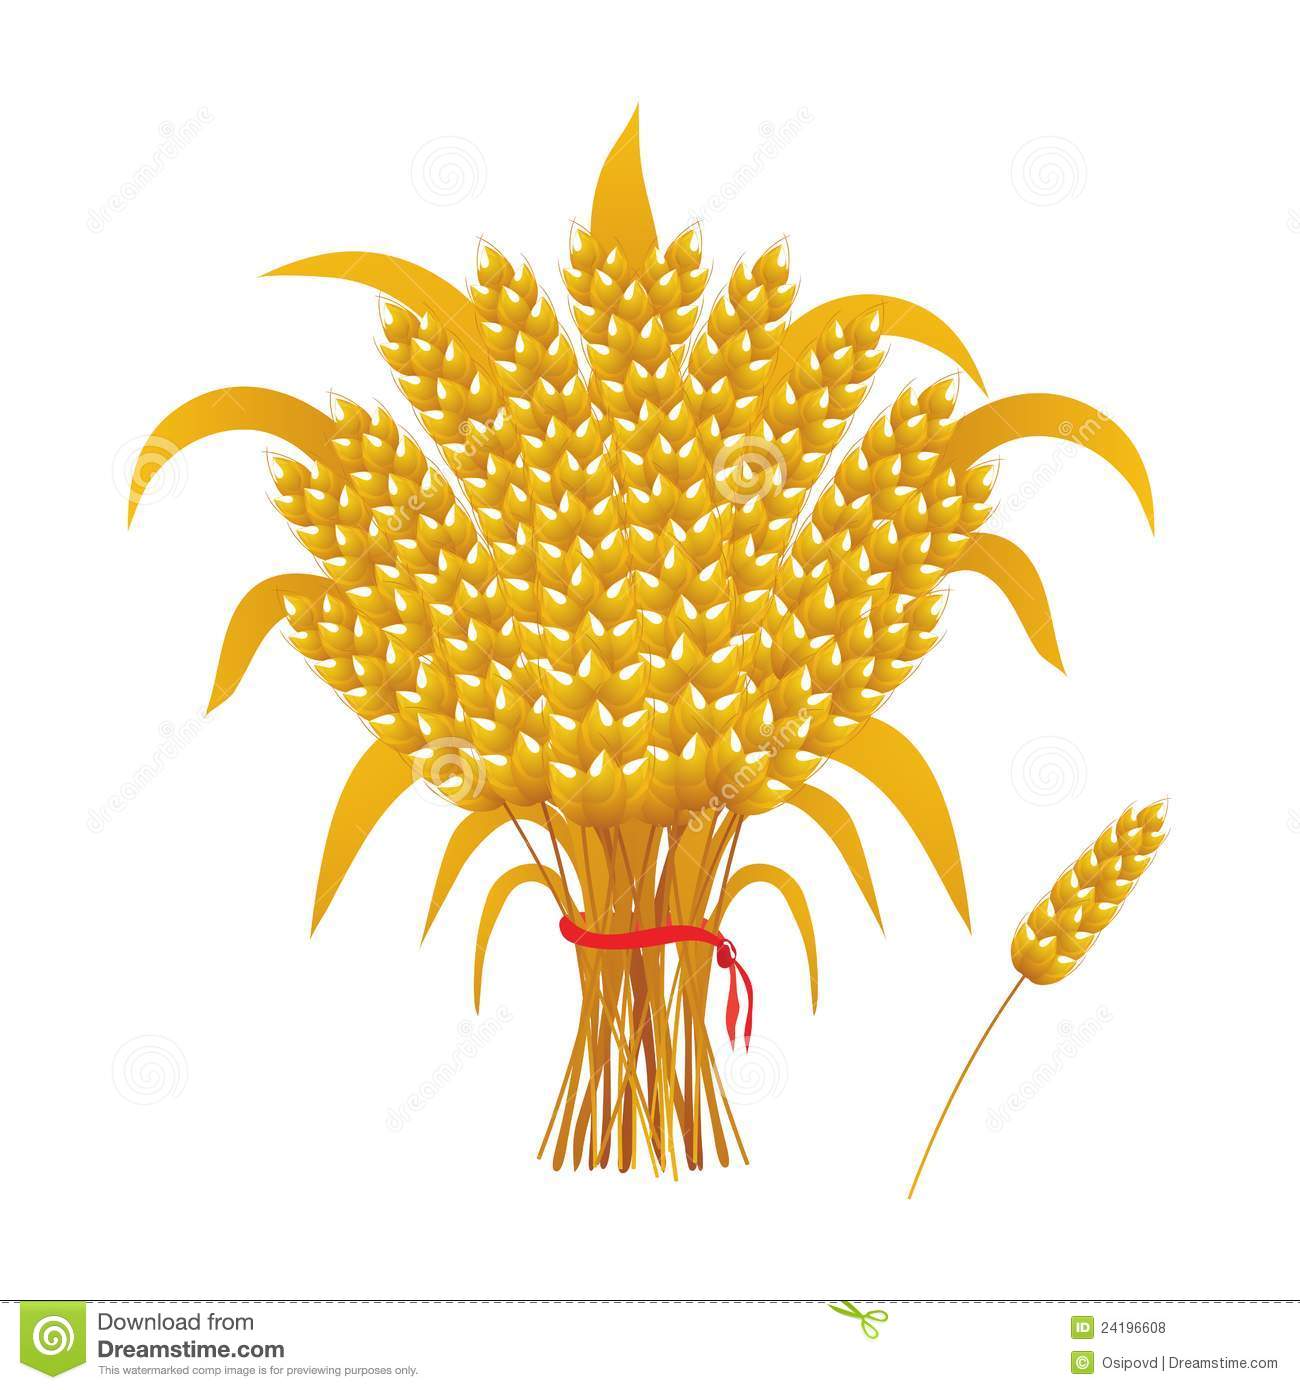 More Similar Stock Images Of   Wheat Ears Of Corn A Sheaf Of Wheat  